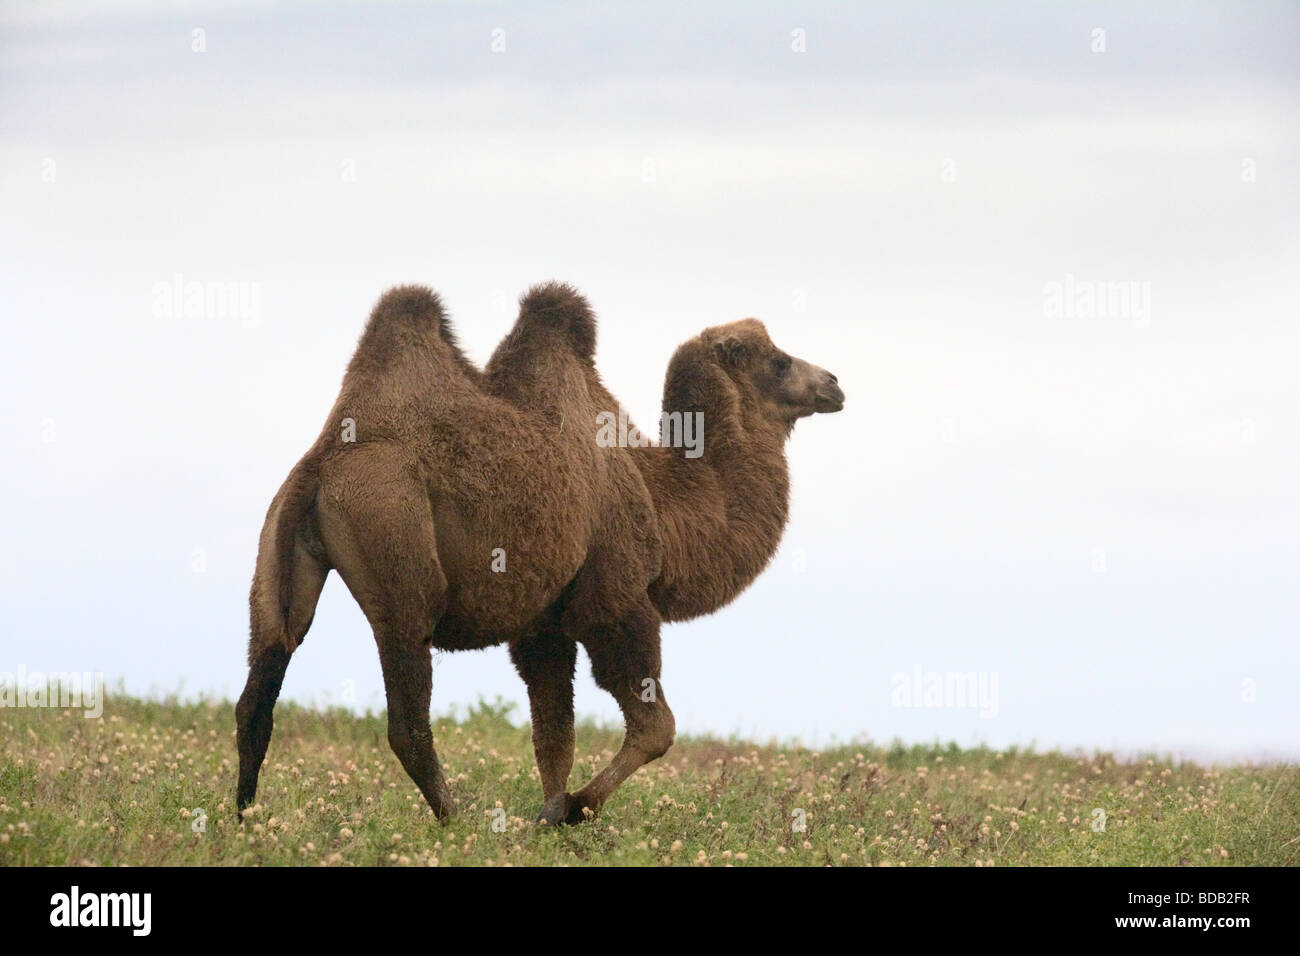 Two humped camel, north central Mongolia. Stock Photo